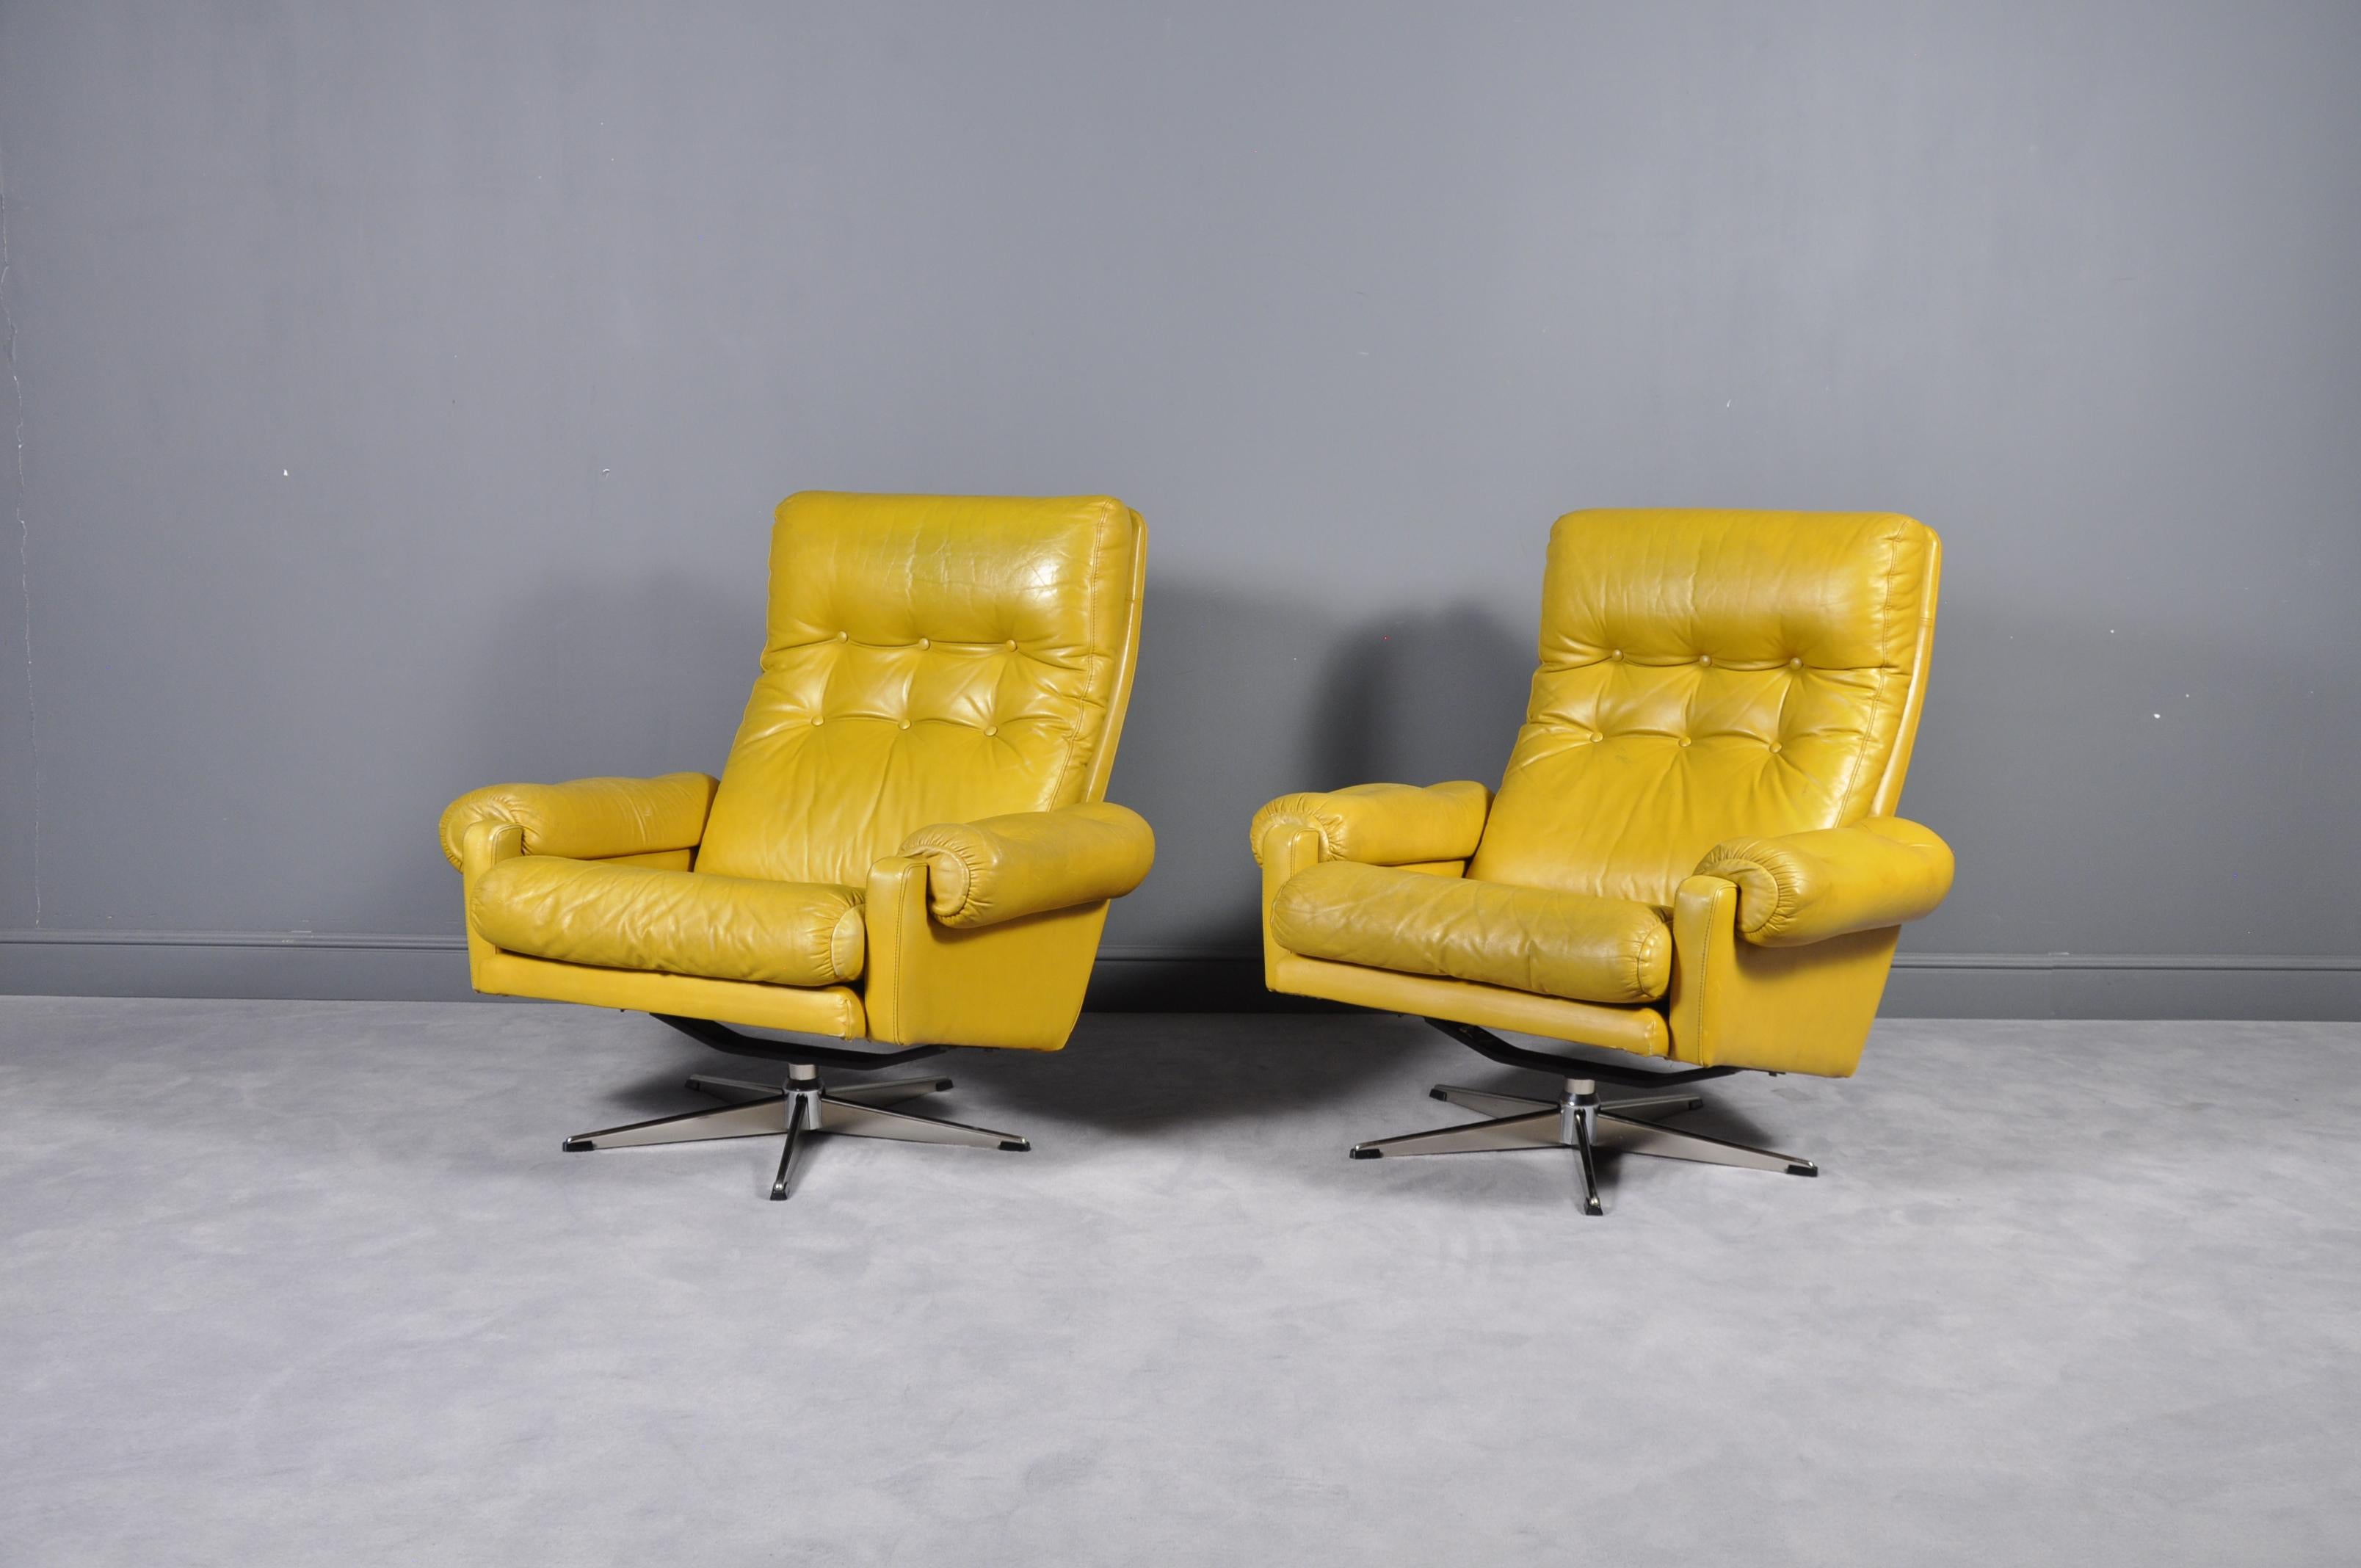 Set of two swivel yellow leather chairs from Lystolet.